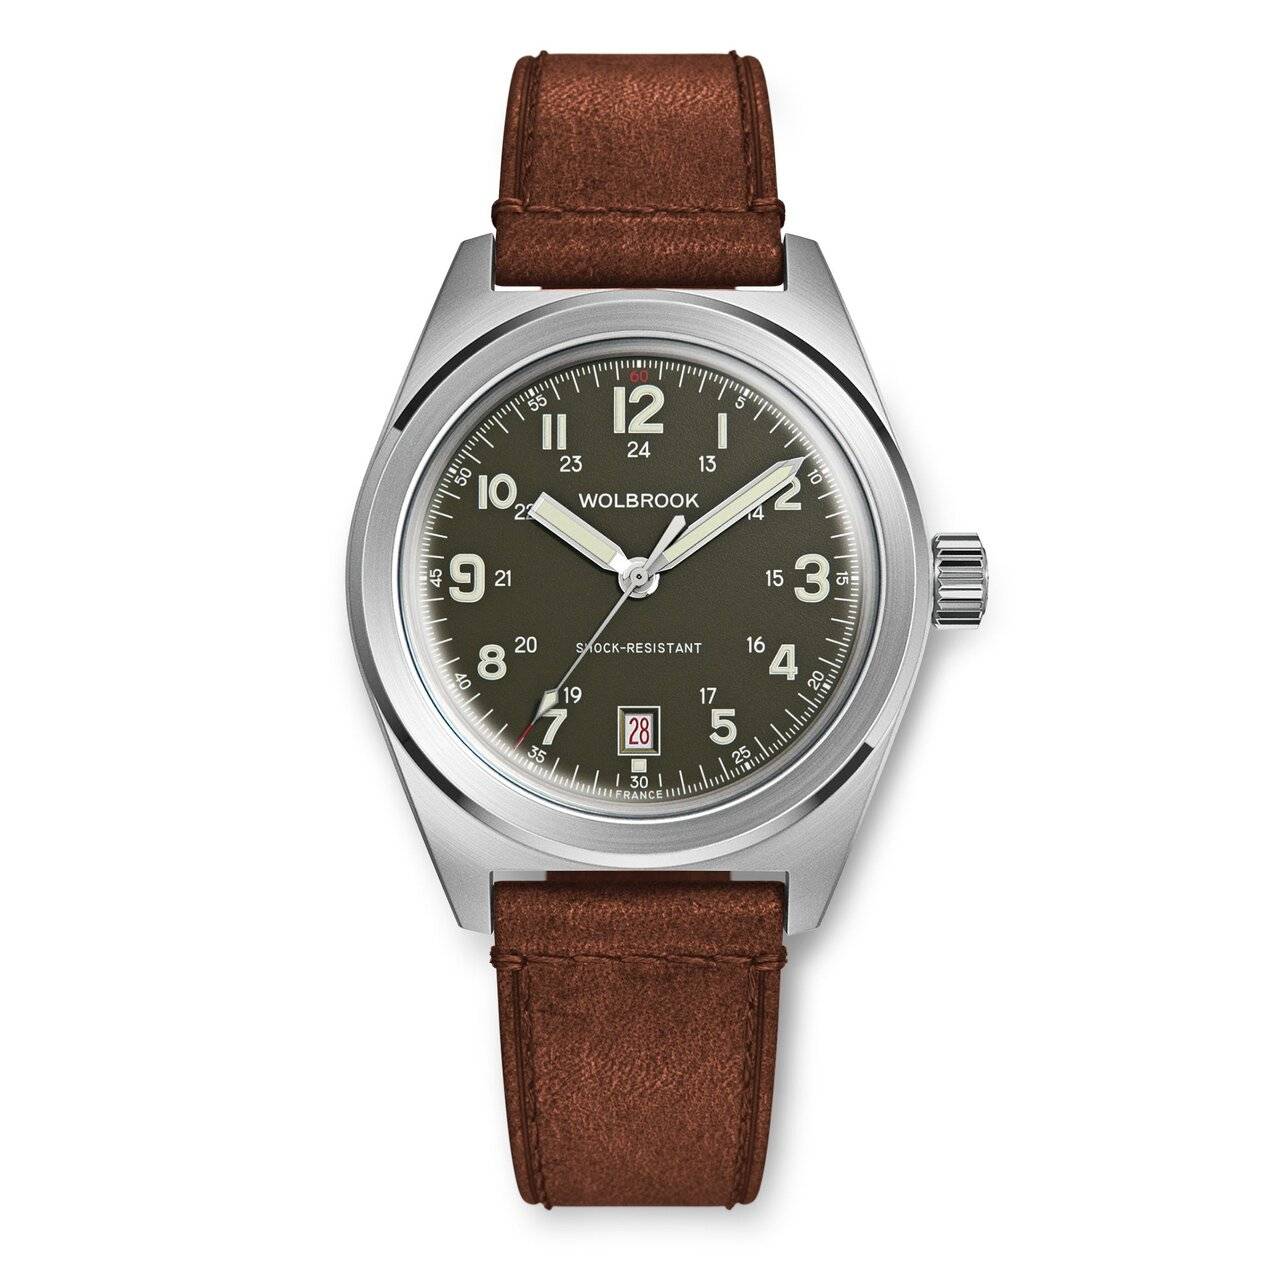 outrider-automatic-watch-french-army-green-dial-green-lum-brown-leather-strap-23-oa-005-lr4-brn.jpg